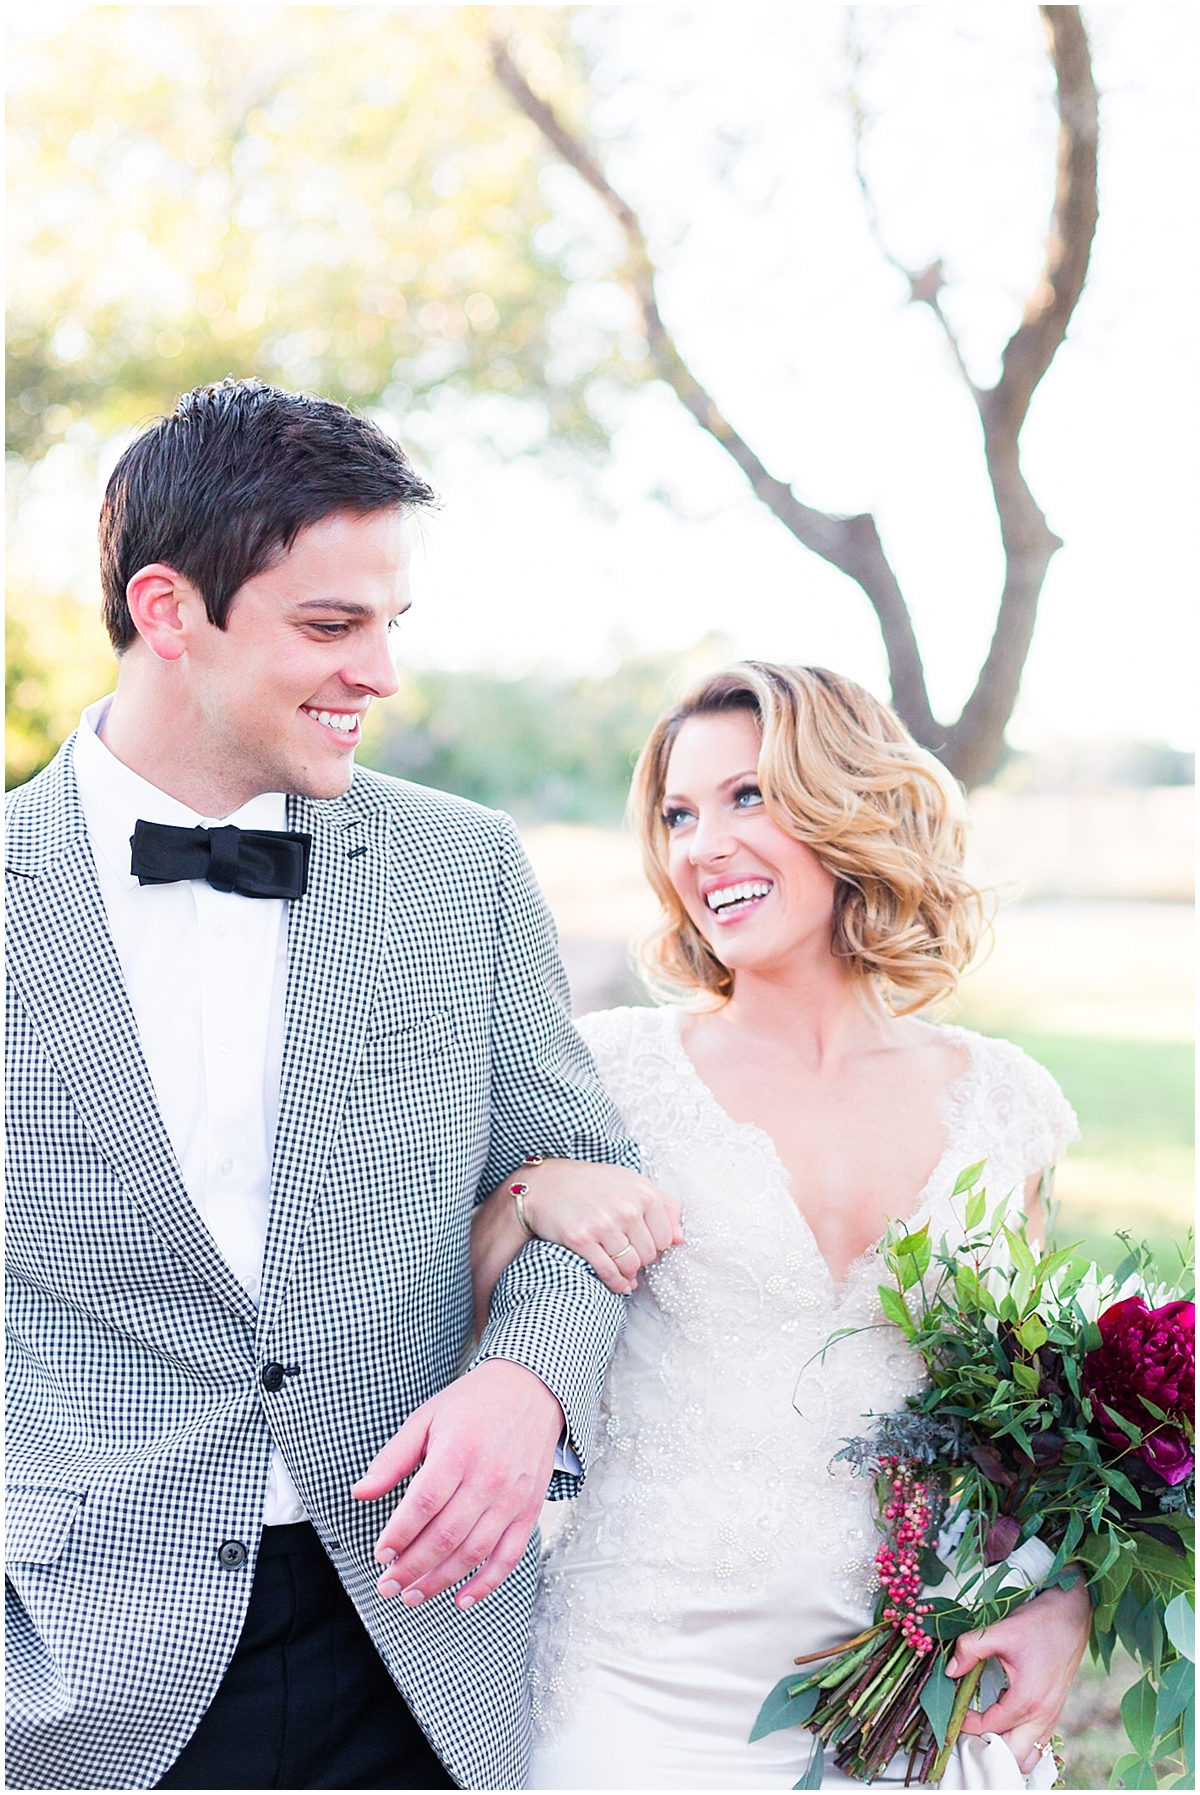 a-classic-modern-black-and-white-wedding-with-gold-accents-inspirational-shoot-at-pecan-springs-ranch-by-allison-jeffers-wedding-photography-dripping-springs-wedding-photographer_0069